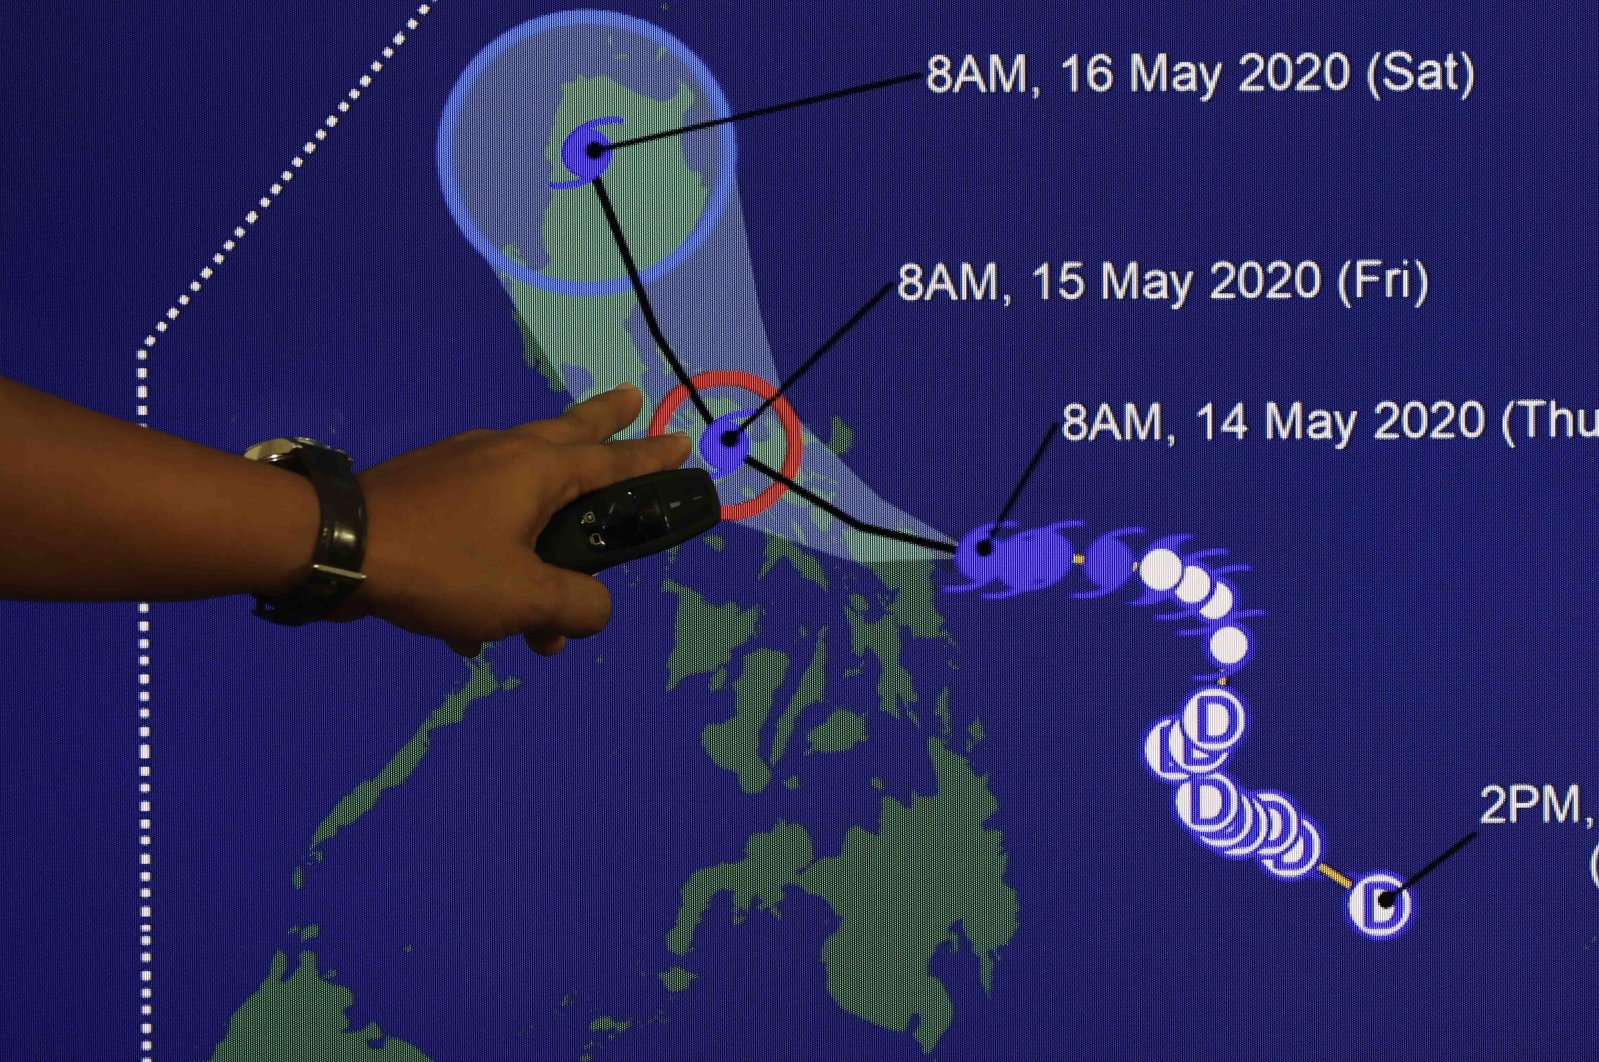 Weather forecaster Christopher Perez points to a projected track of Typhoon Vongfong during a briefing at the Philippine Atmospheric Geophysical and Astronomical Services Administration (PAGASA) headquarters, Quezon City, Metro Manila, Philippines, May 14, 2020. (EPA Photo)